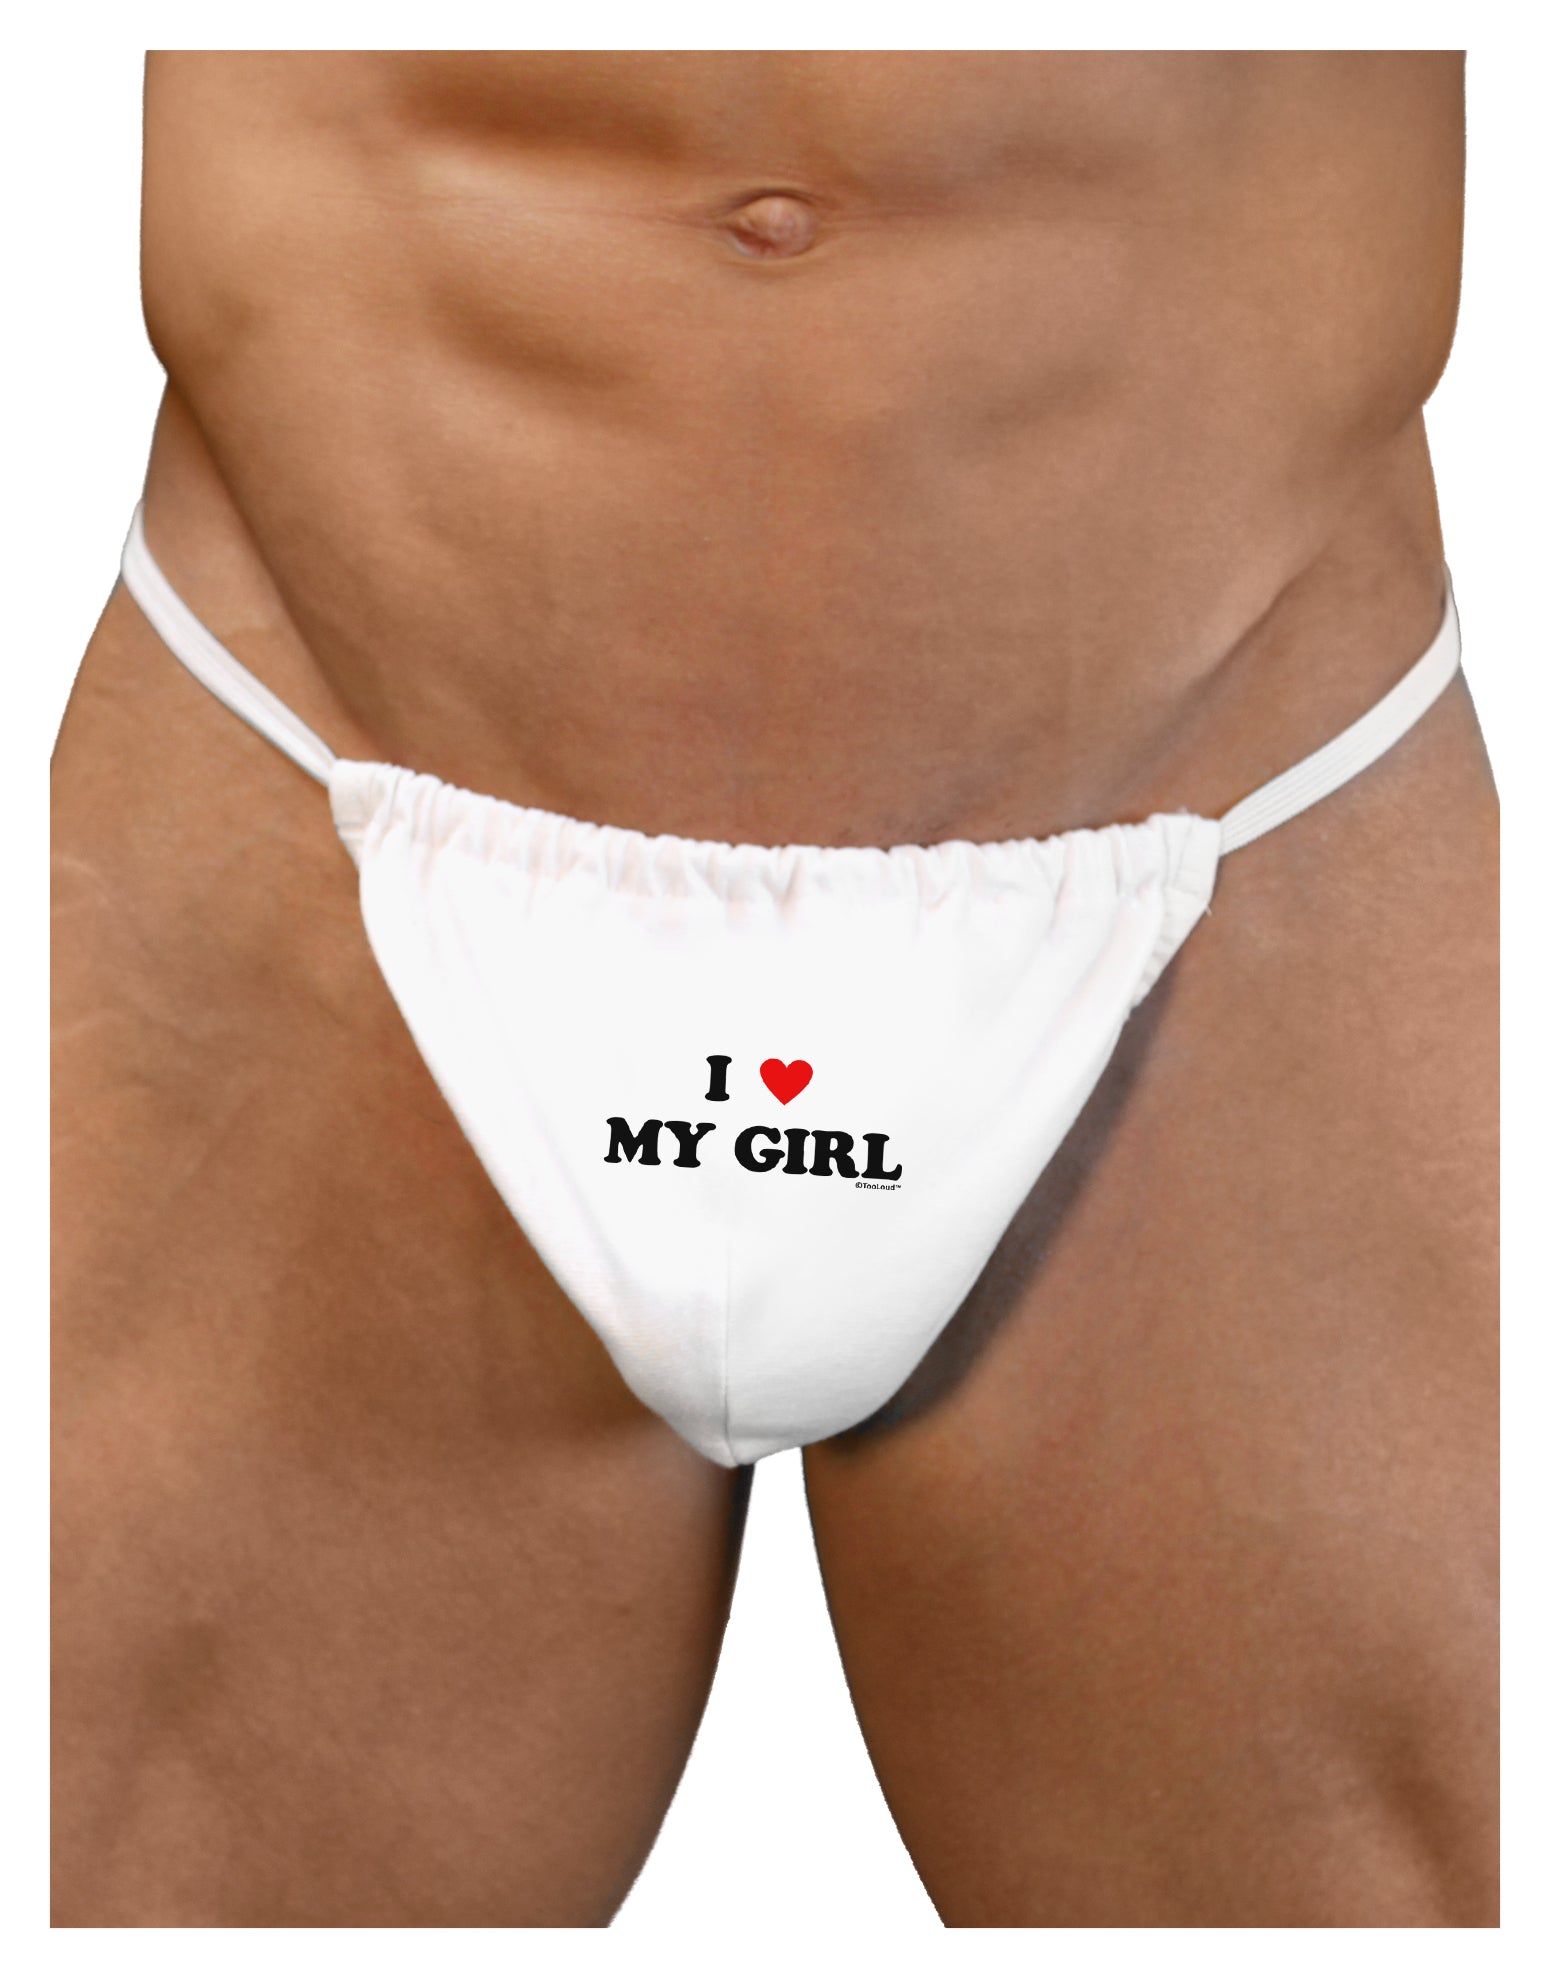 What is the difference between men's thong and G-string? by